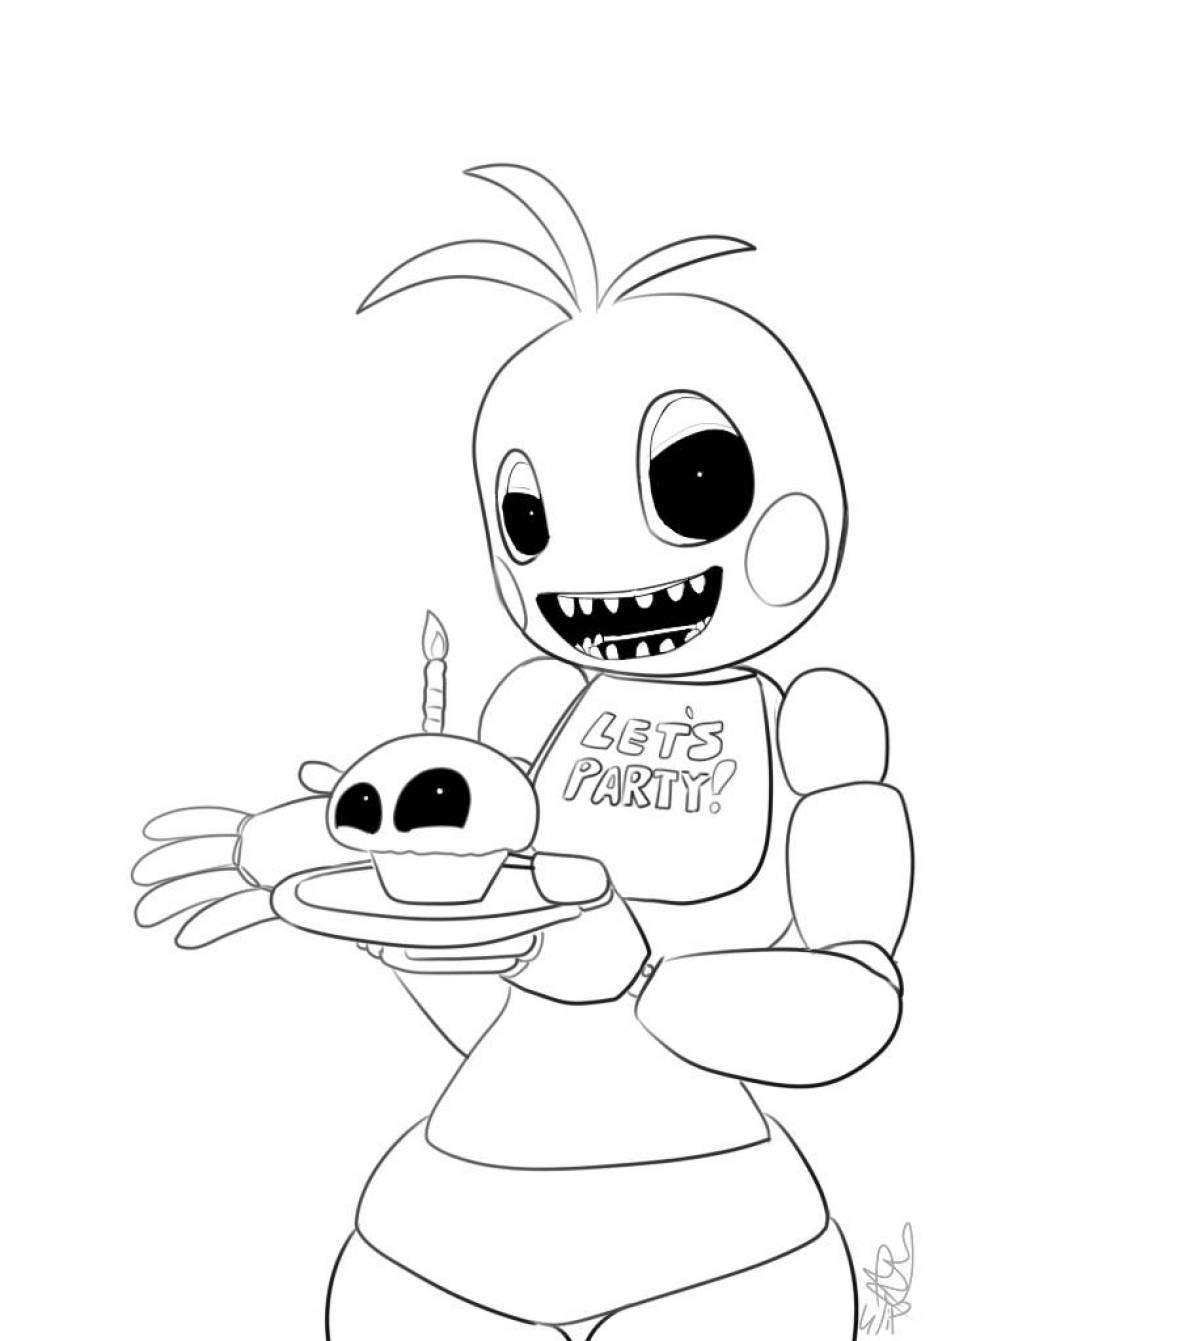 Chica's funny coloring book